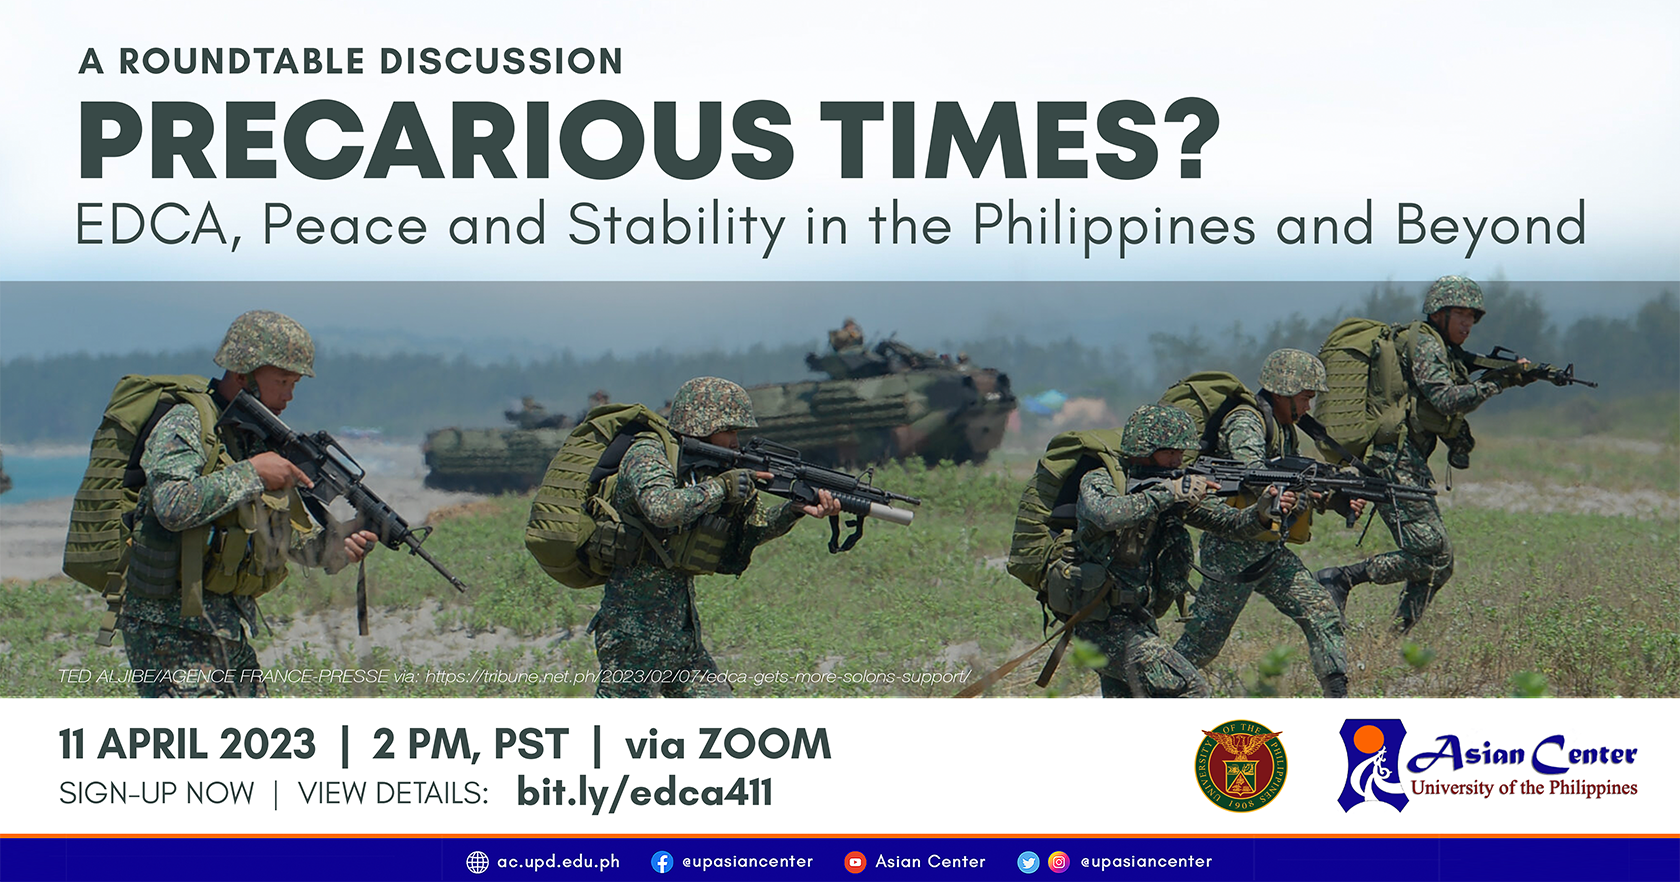 Precarious Times? EDCA, Peace and Stability in the Philippines and Beyond | A Roundtable Discussion